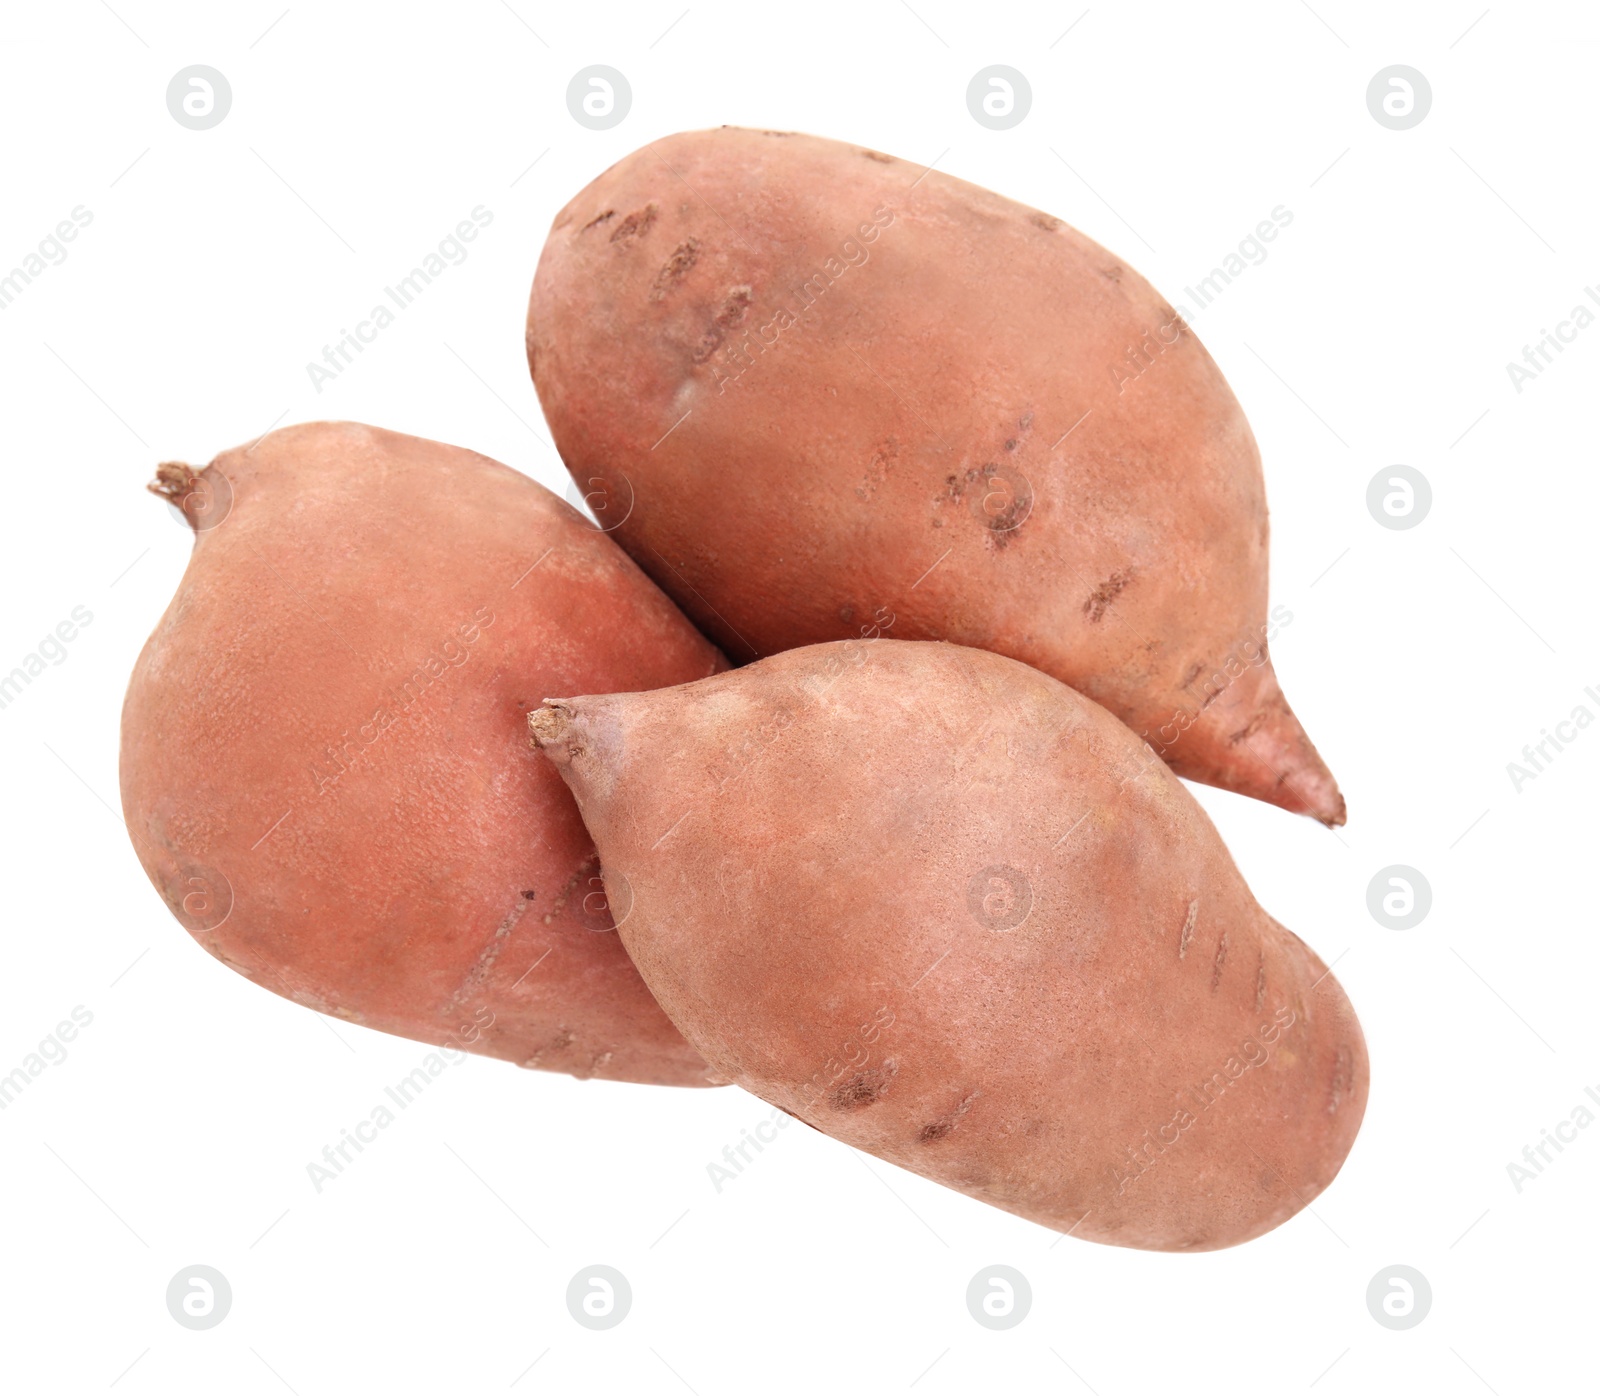 Photo of Tasty fresh sweet potatoes on white background, top view